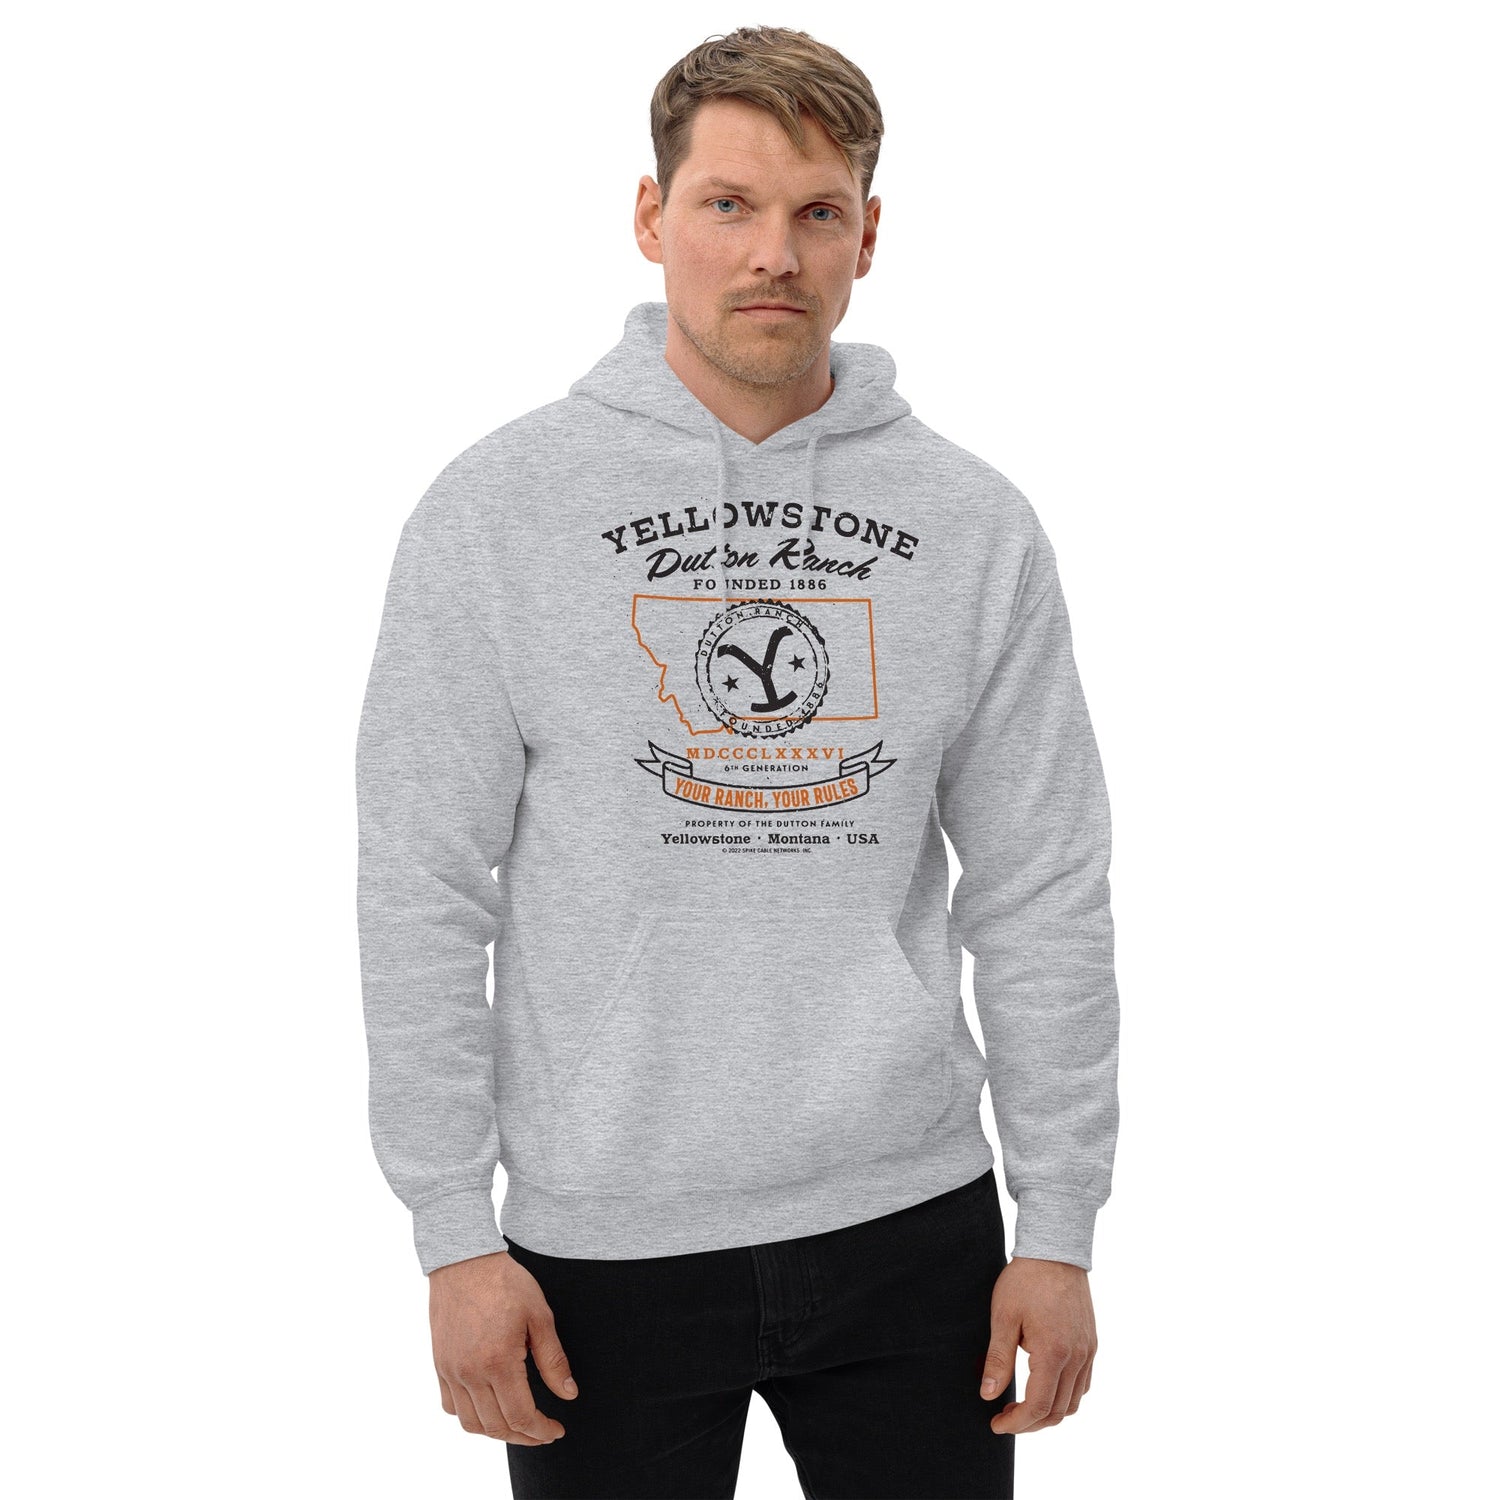 Yellowstone Dutton Ranch Your Ranch Your Rules Hooded Sweatshirt - Paramount Shop